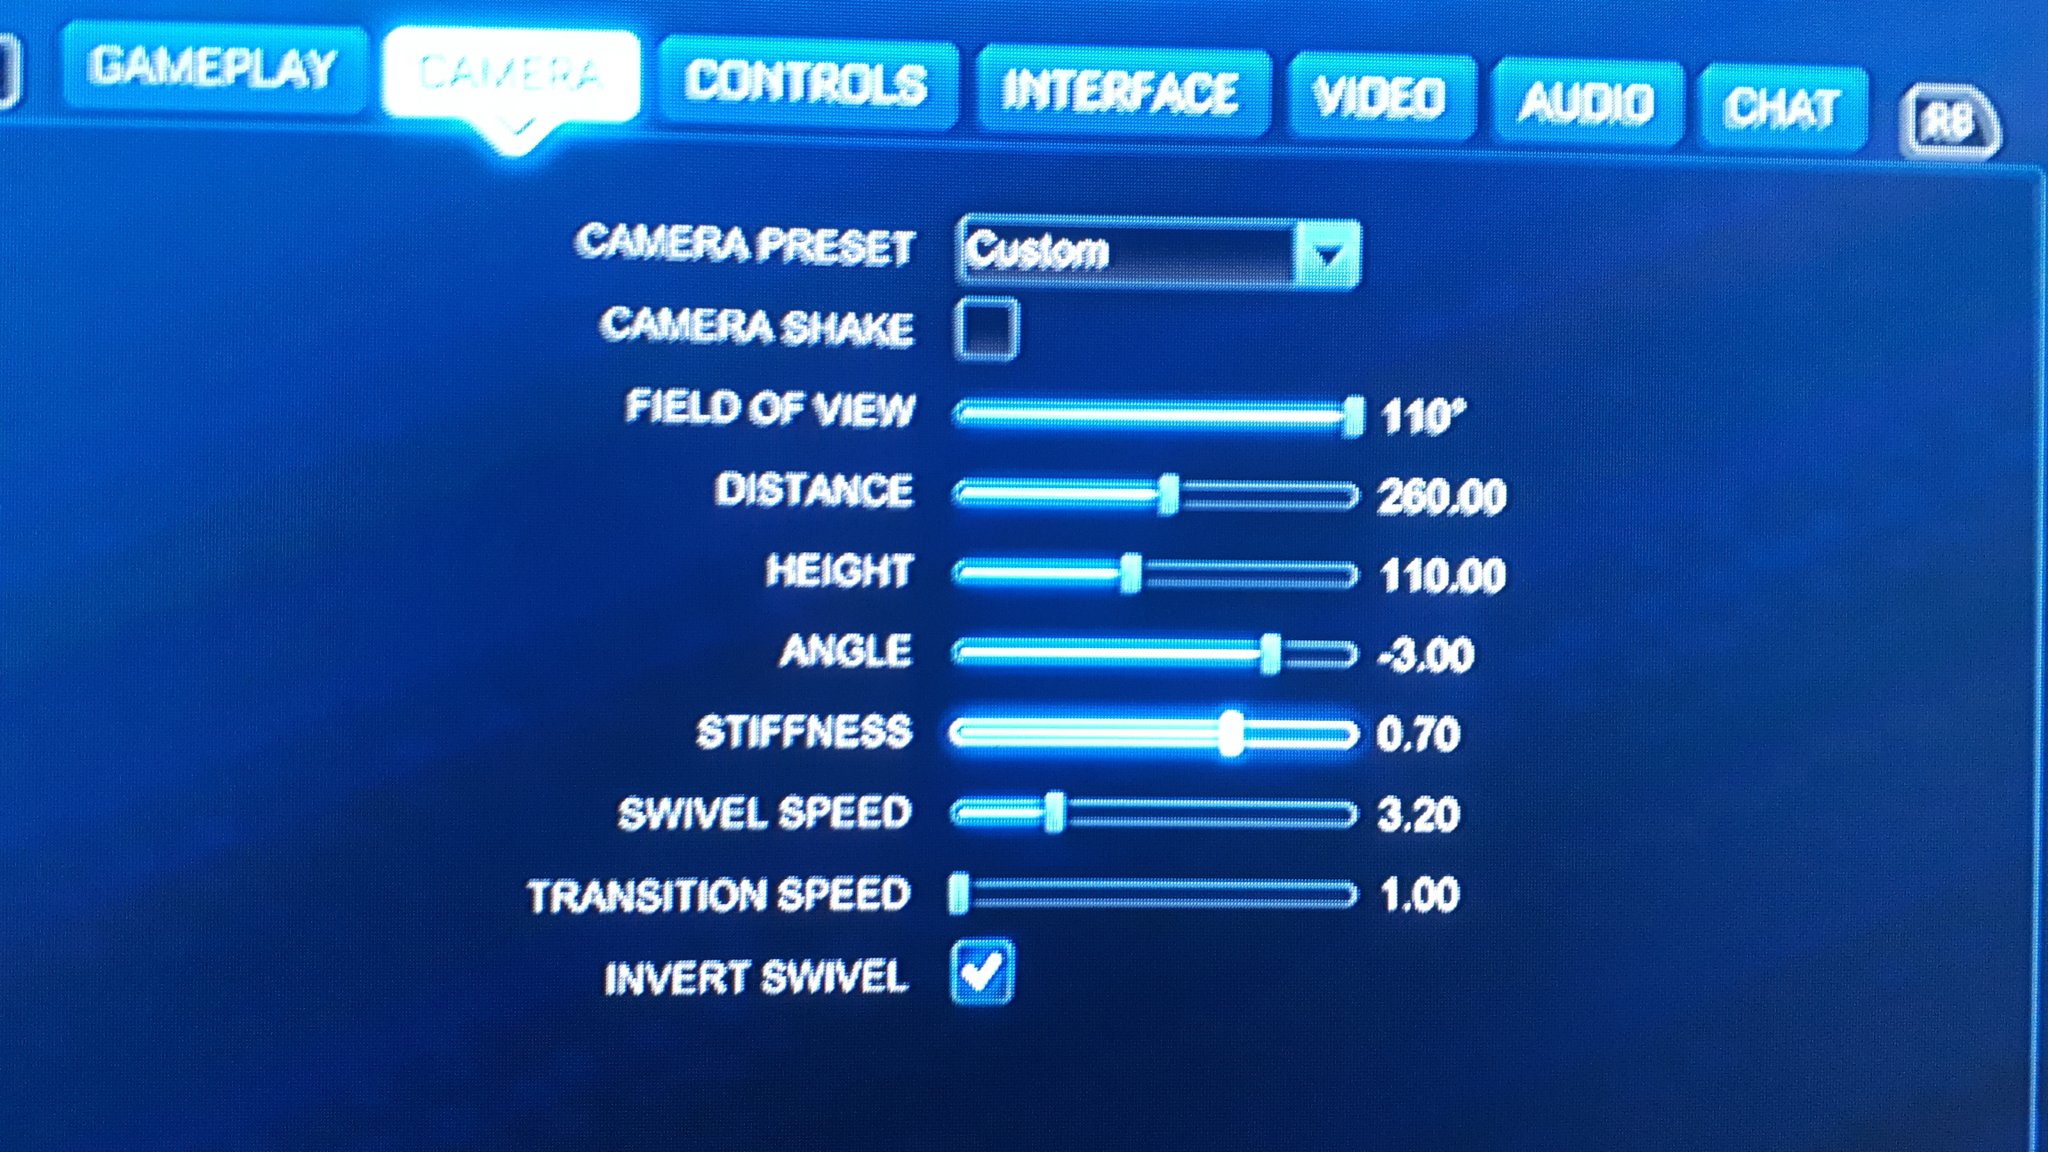 Sentimental Hej Ringlet Squishy on Twitter: "What are your favorite camera settings/deadzone and  sensitivity settings?" / Twitter